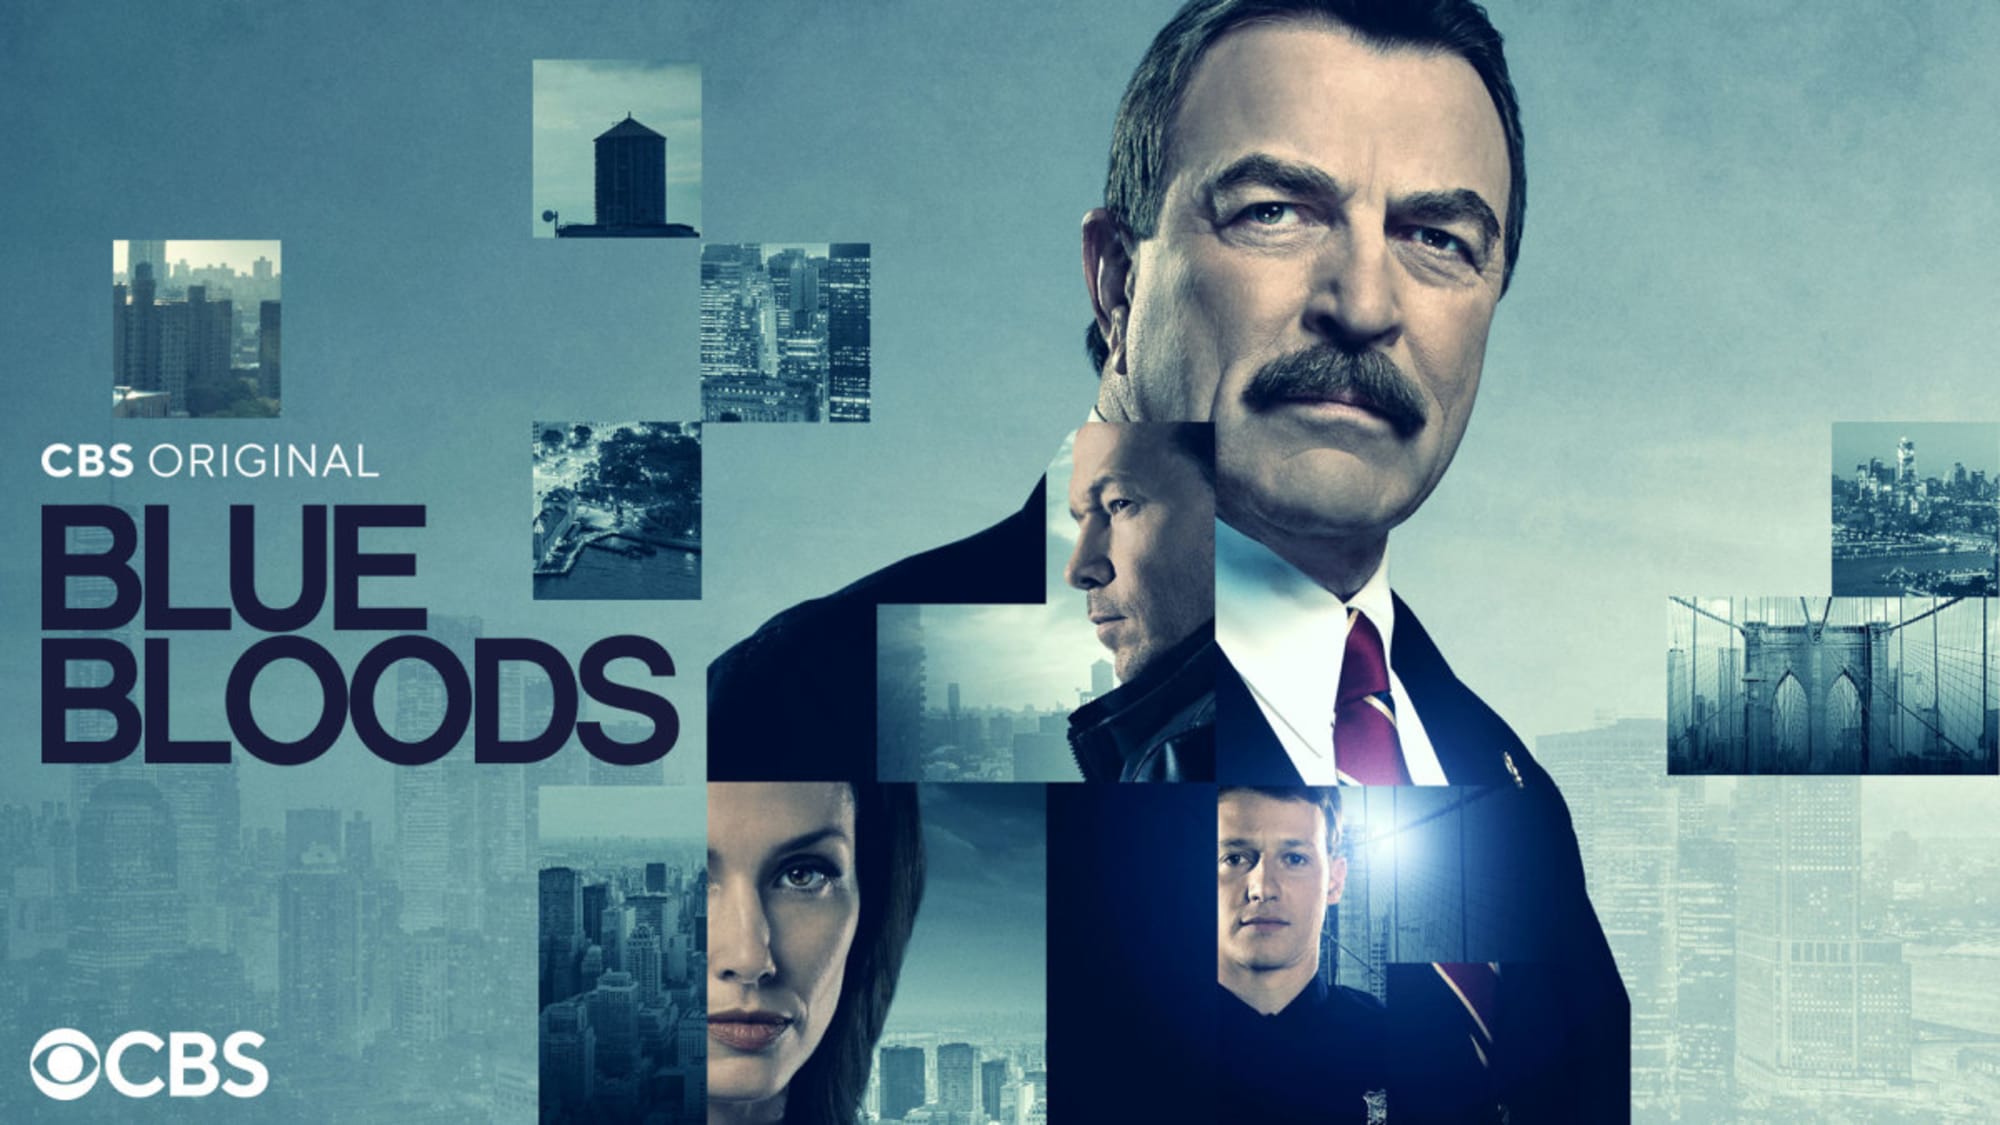 Blue Bloods season 11 premiere date, cast, trailer, synopsis and more